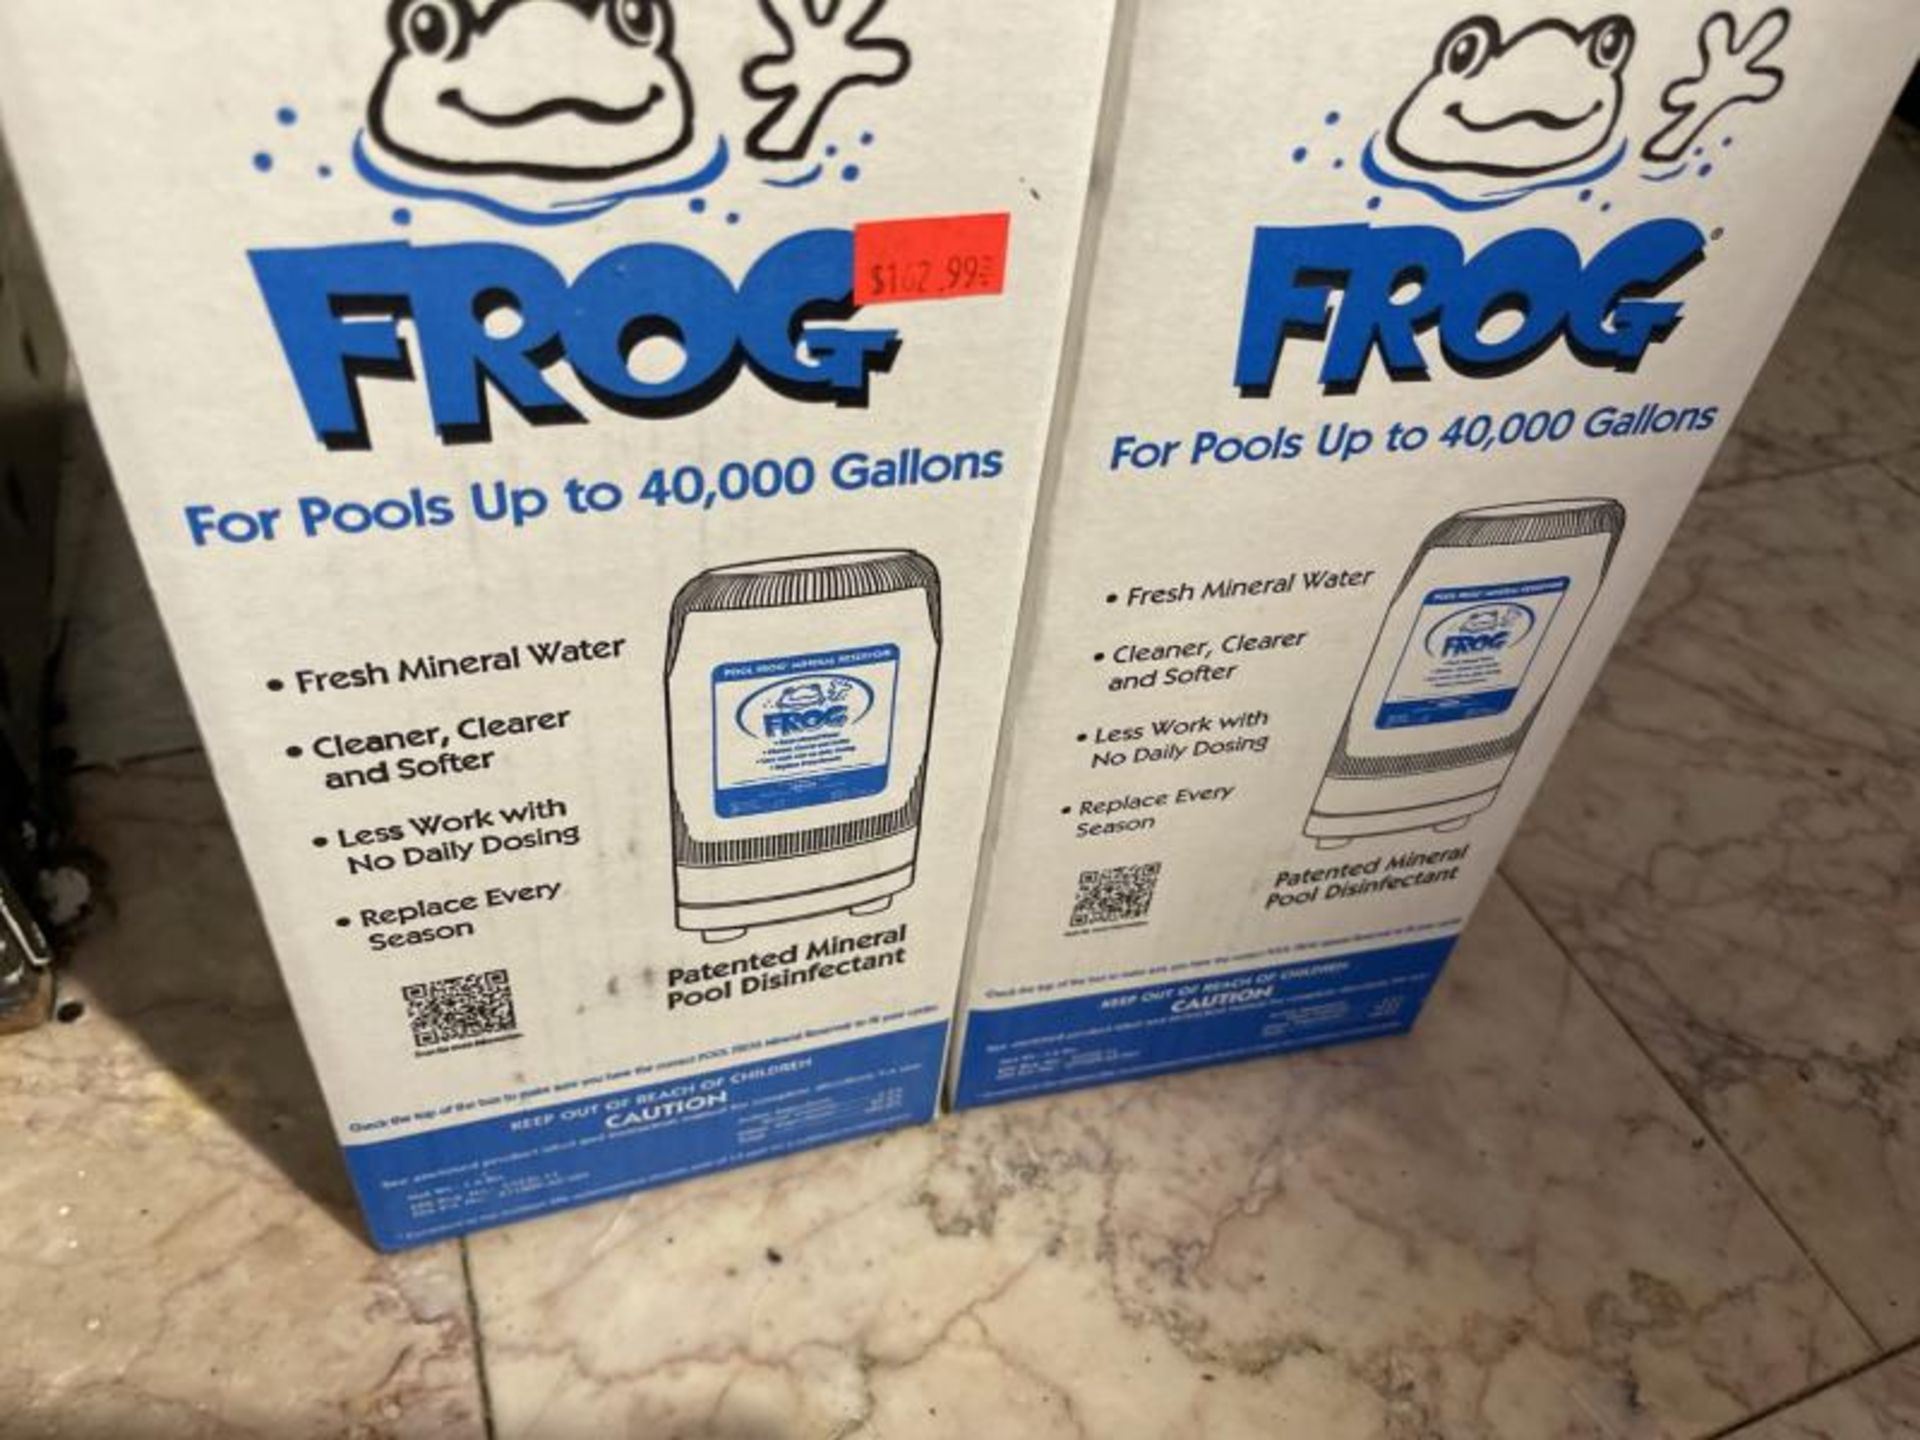 Lot of (2) Pool Frog mineral reservoir refills for pools up to 40,000 gallons, series 5400 - Image 2 of 3